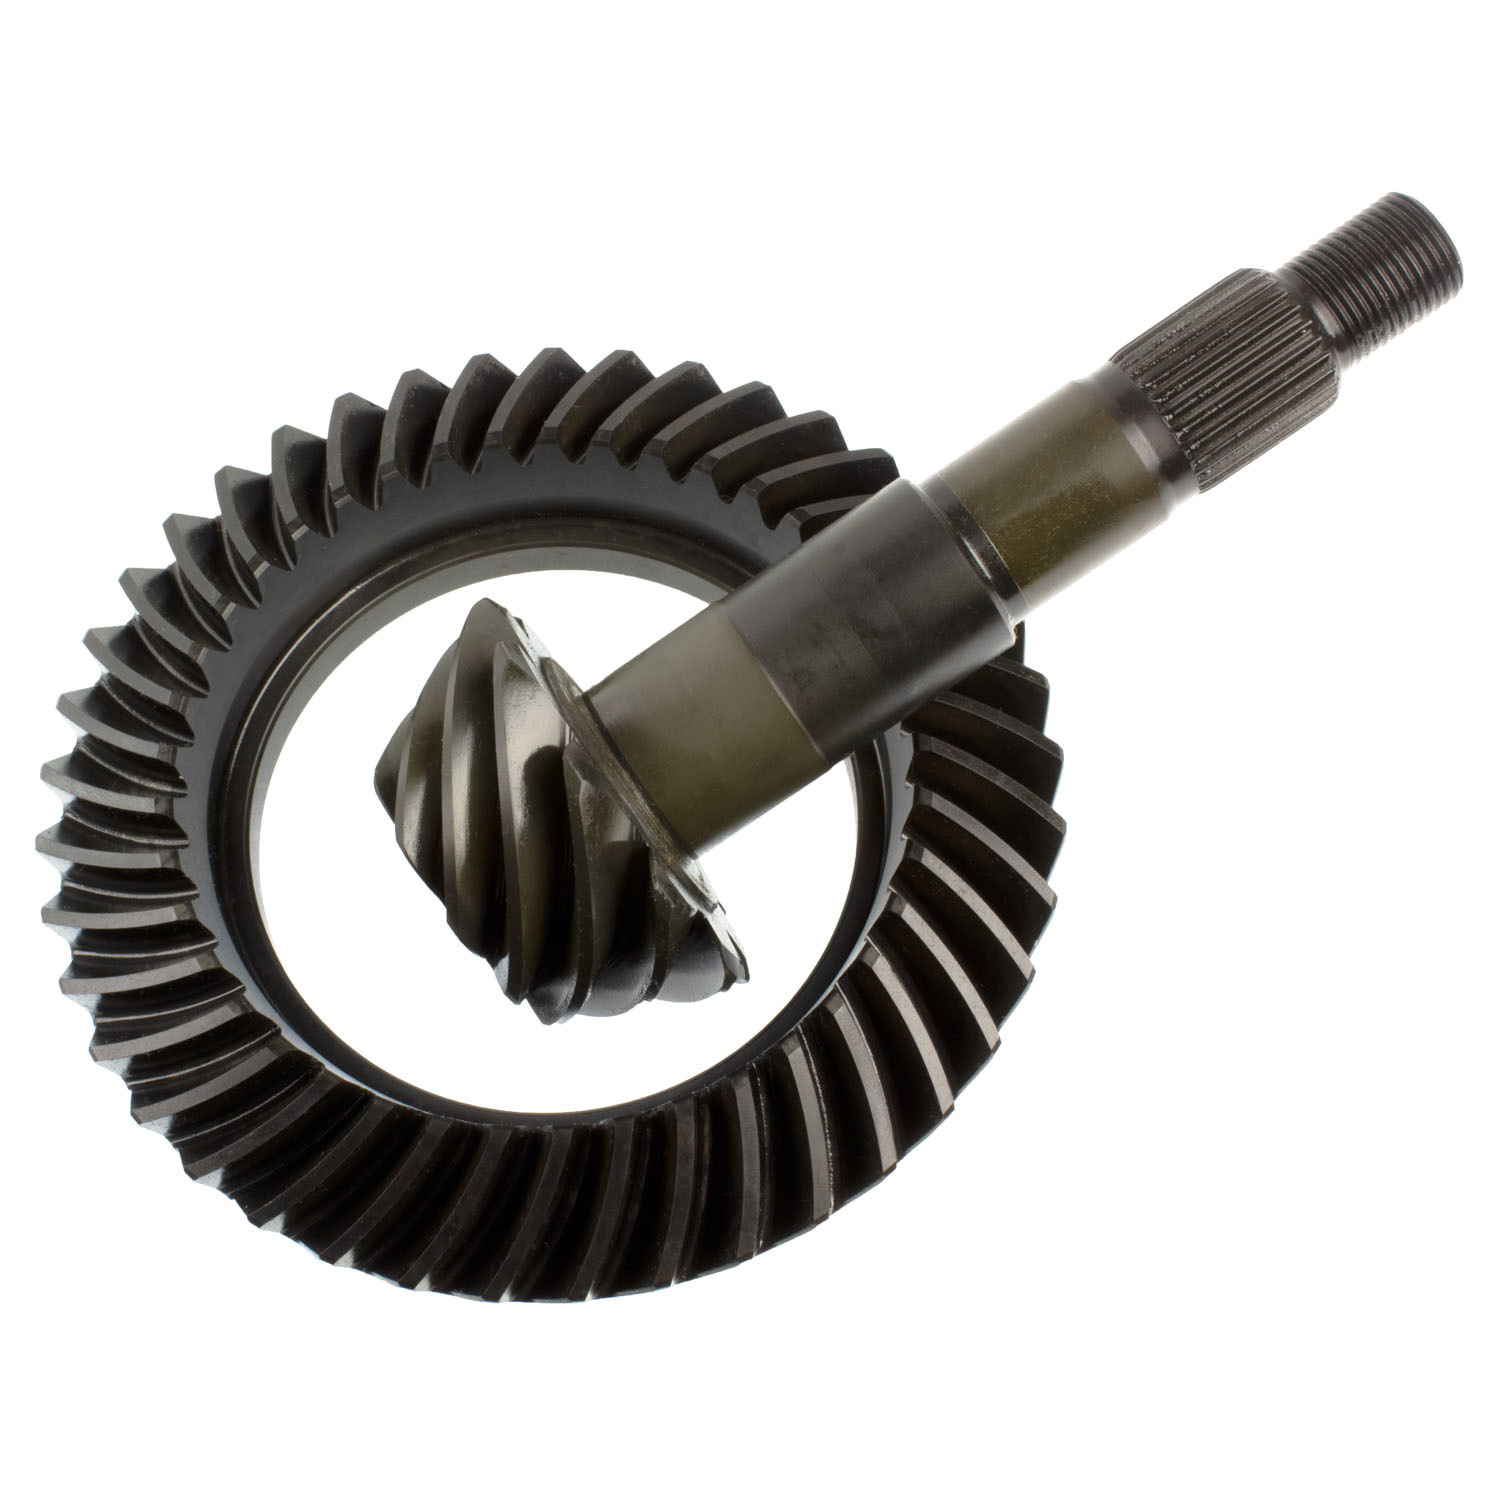 Richmond Gear GM75410OE - Ring and Pinion, Excel, 4.10 Ratio, 27 Spline Pinion, 3 Series, 7.5 in / 7.625 in / 7.6 in IFS, GM 10-Bolt, Kit